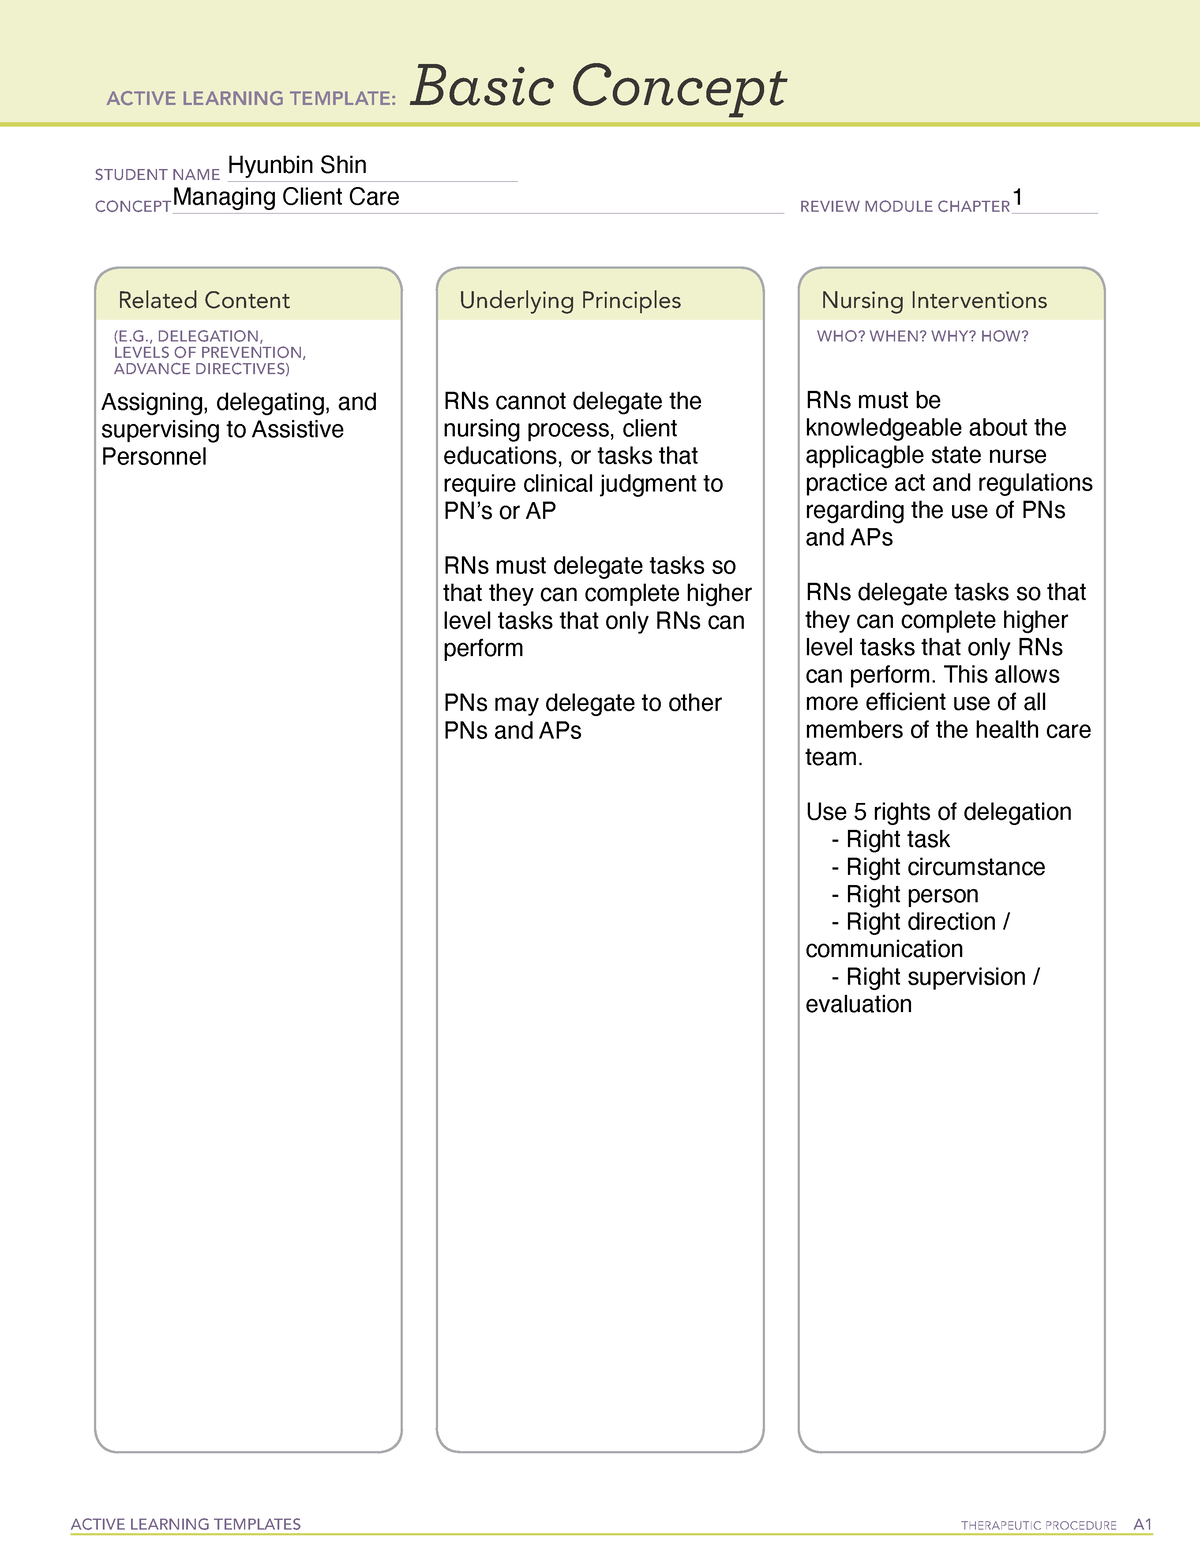 Leadership ATI_Learning Template ACTIVE LEARNING TEMPLATES